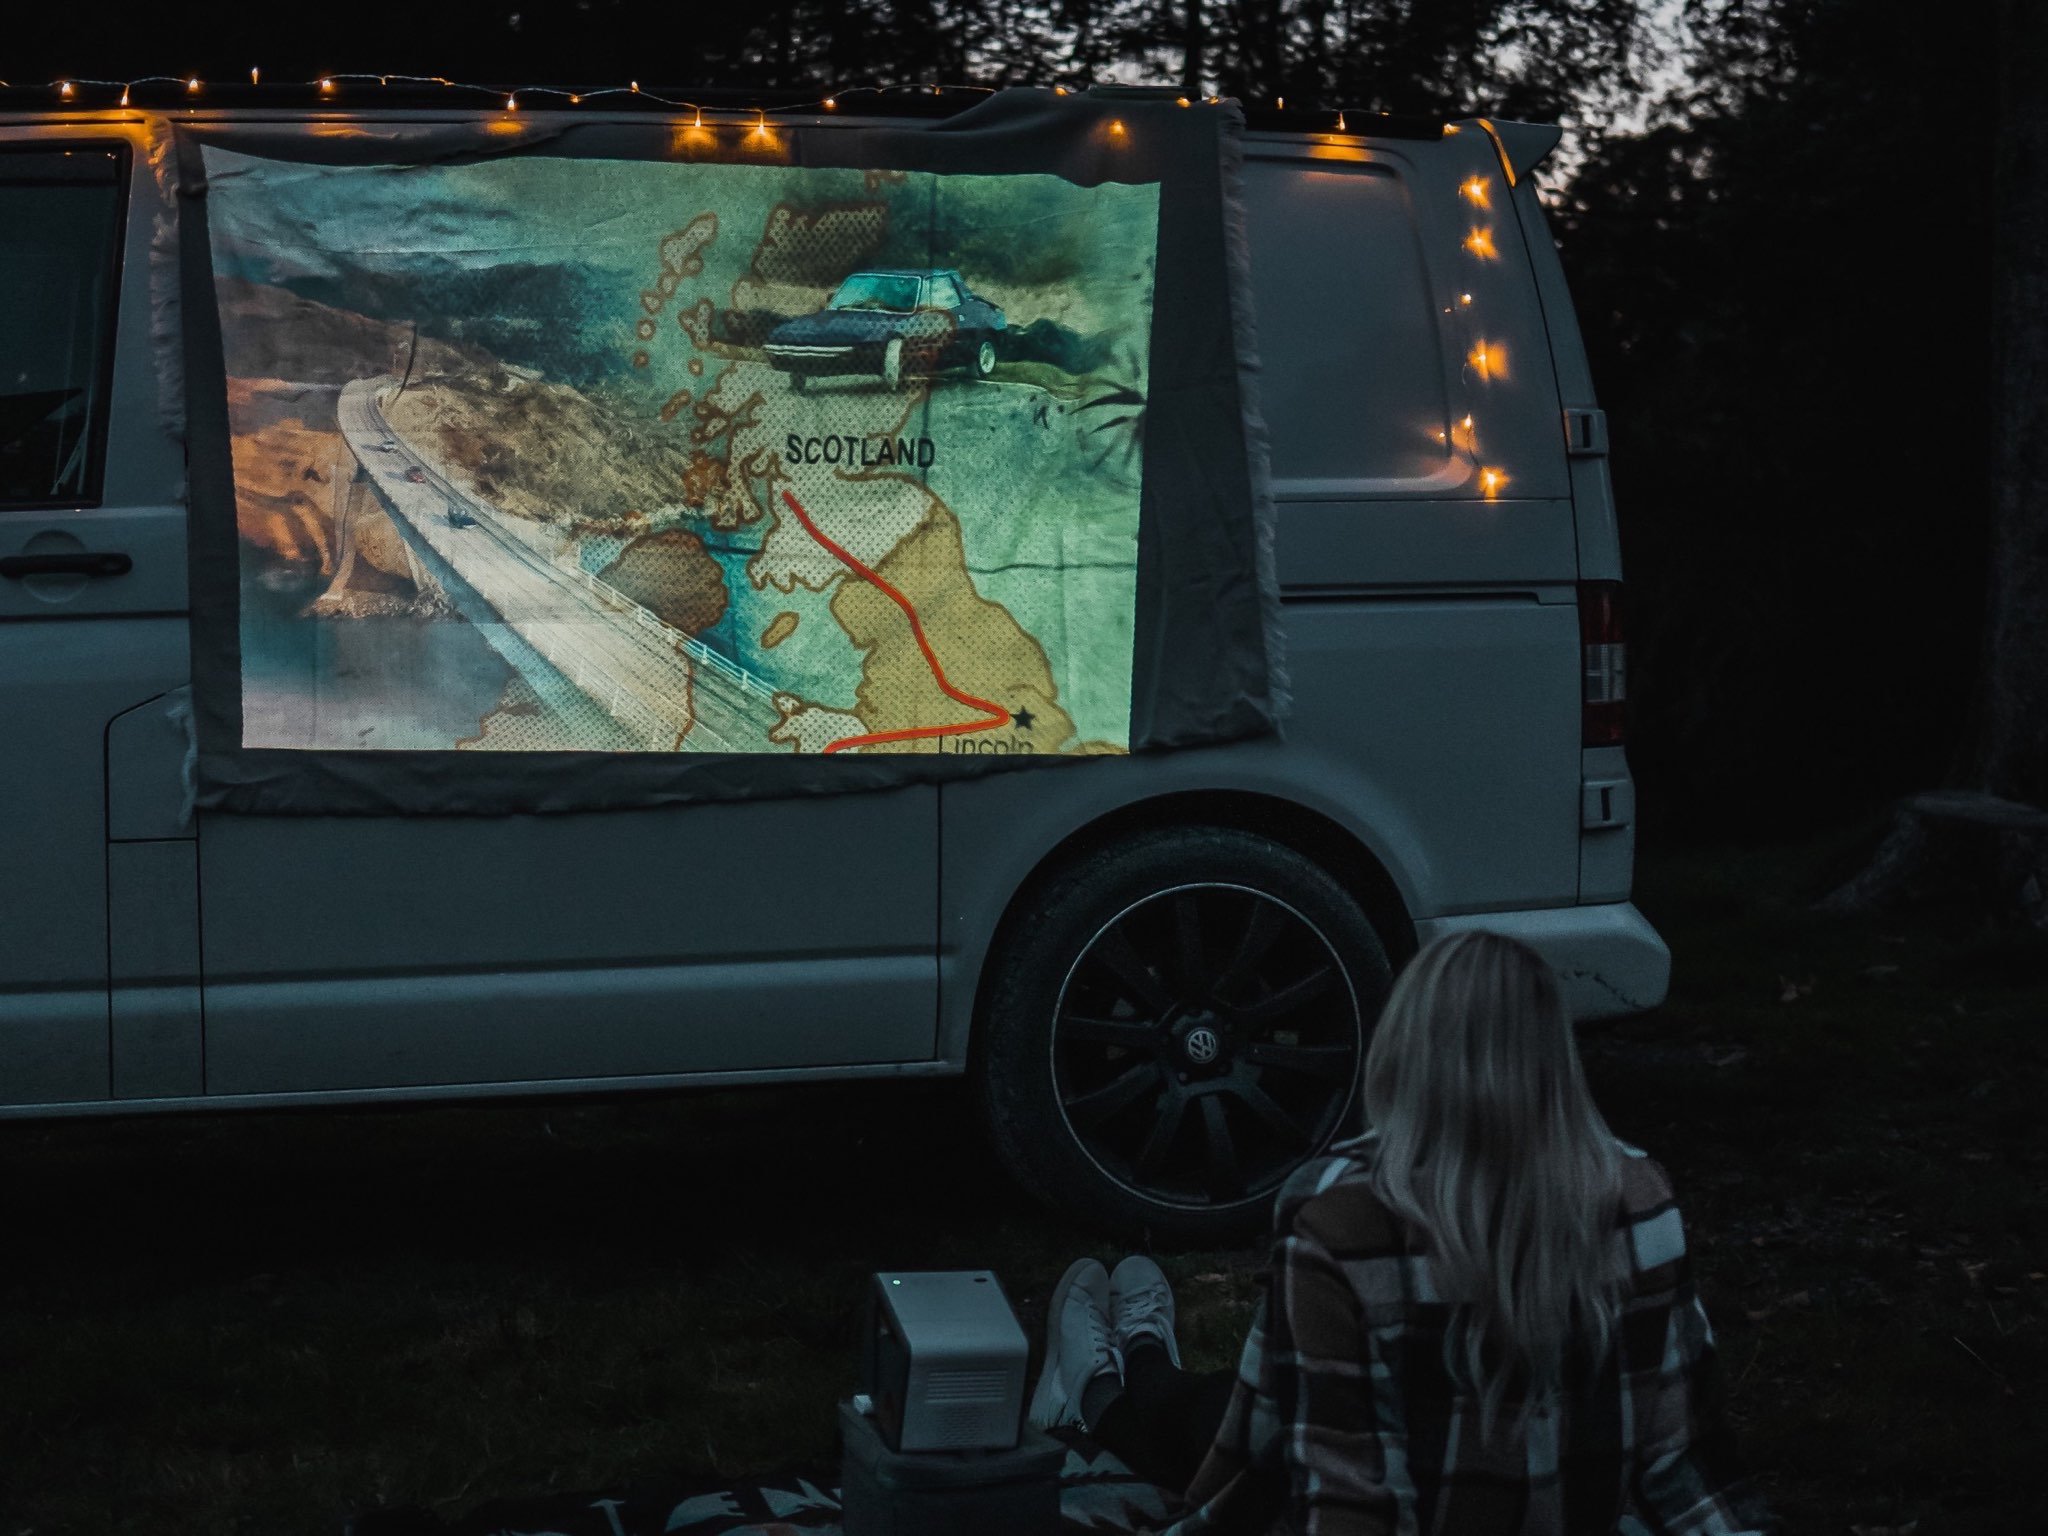 outdoor projector makes camping glamping